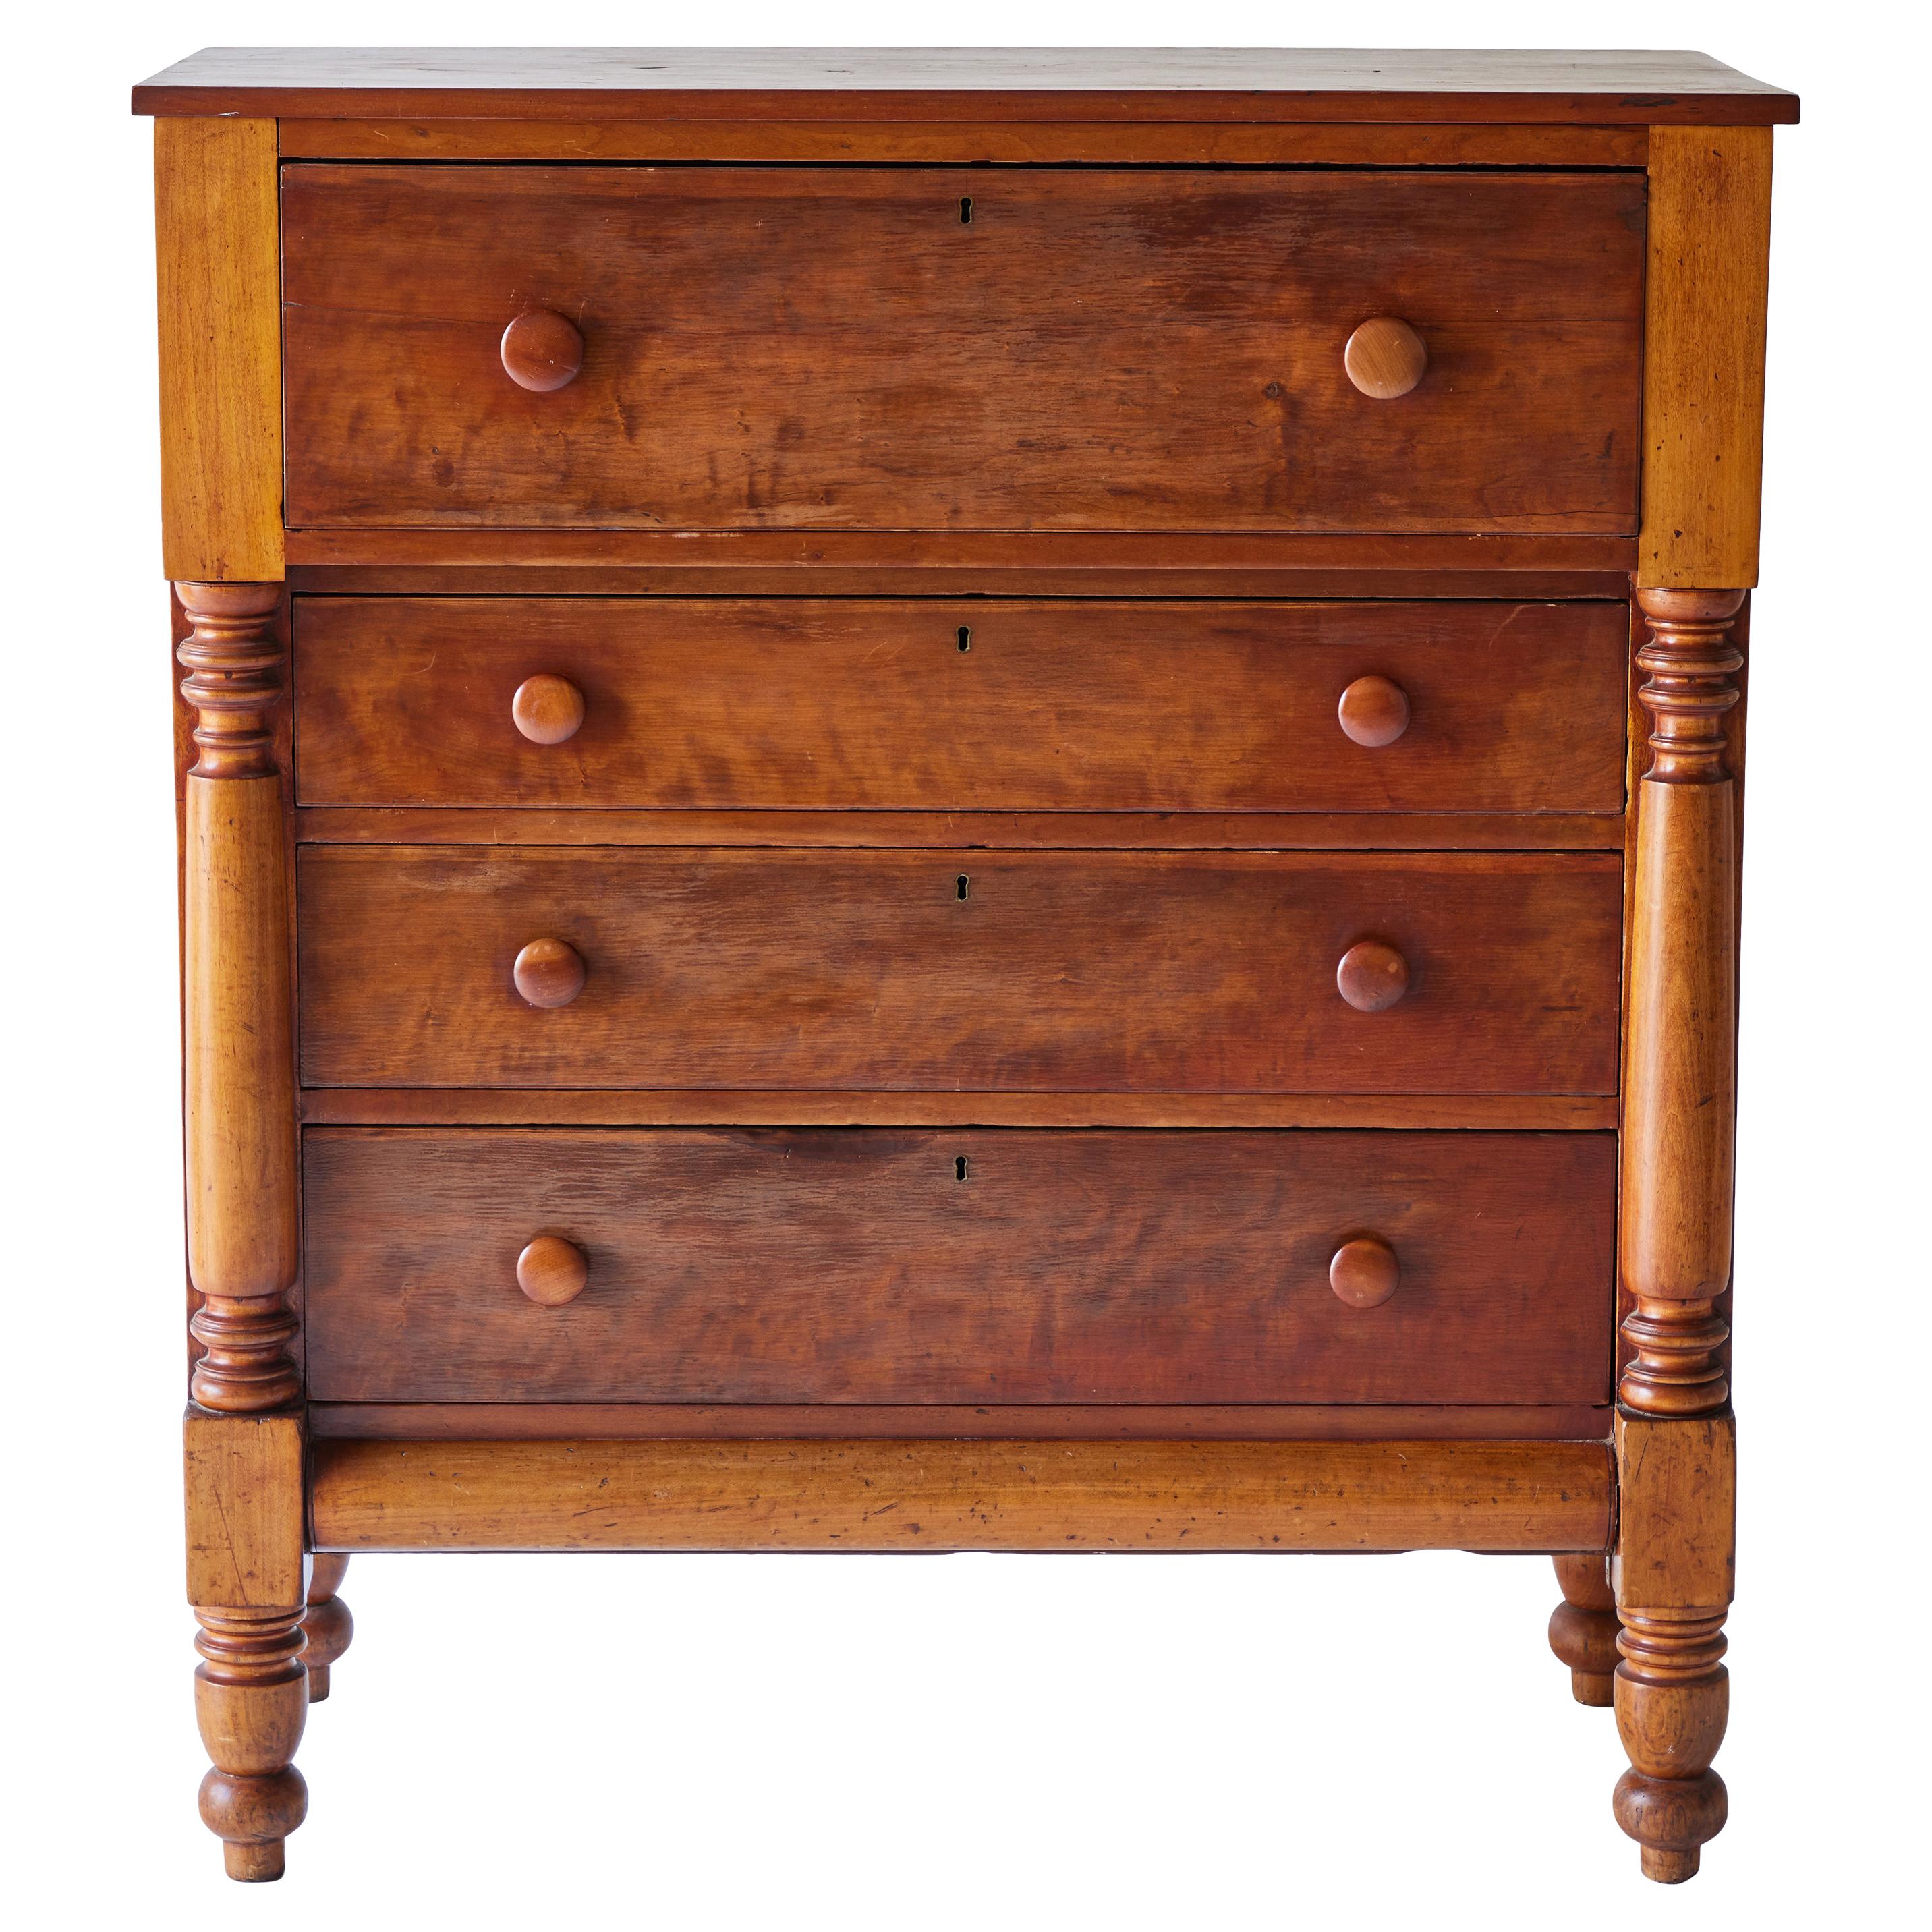 19th Century American Chest of Drawers